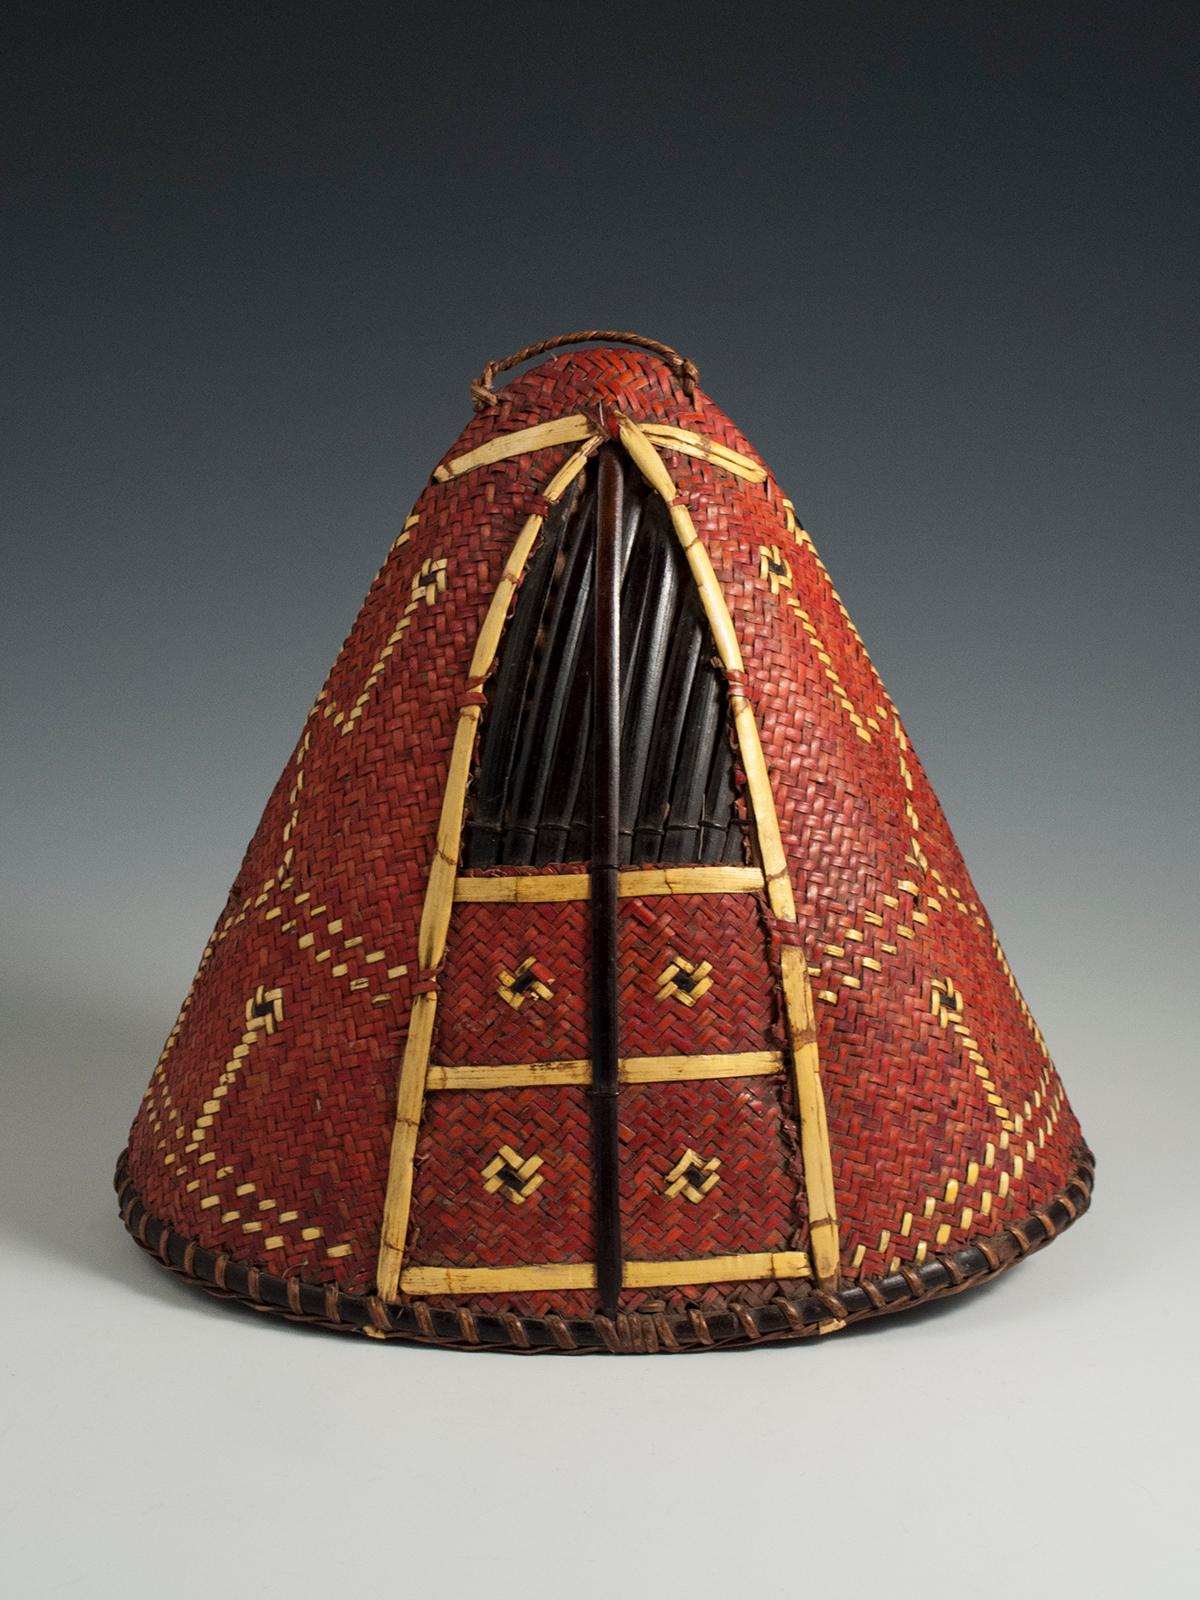 Early to mid-20th century Tribal Hat, Naga People, Northeastern India

A red-dyed woven cane conical-shaped warrior's hat has yellow orchid straw designs interwoven in typical fashion. There may have been a boar's tusk attached to the front -